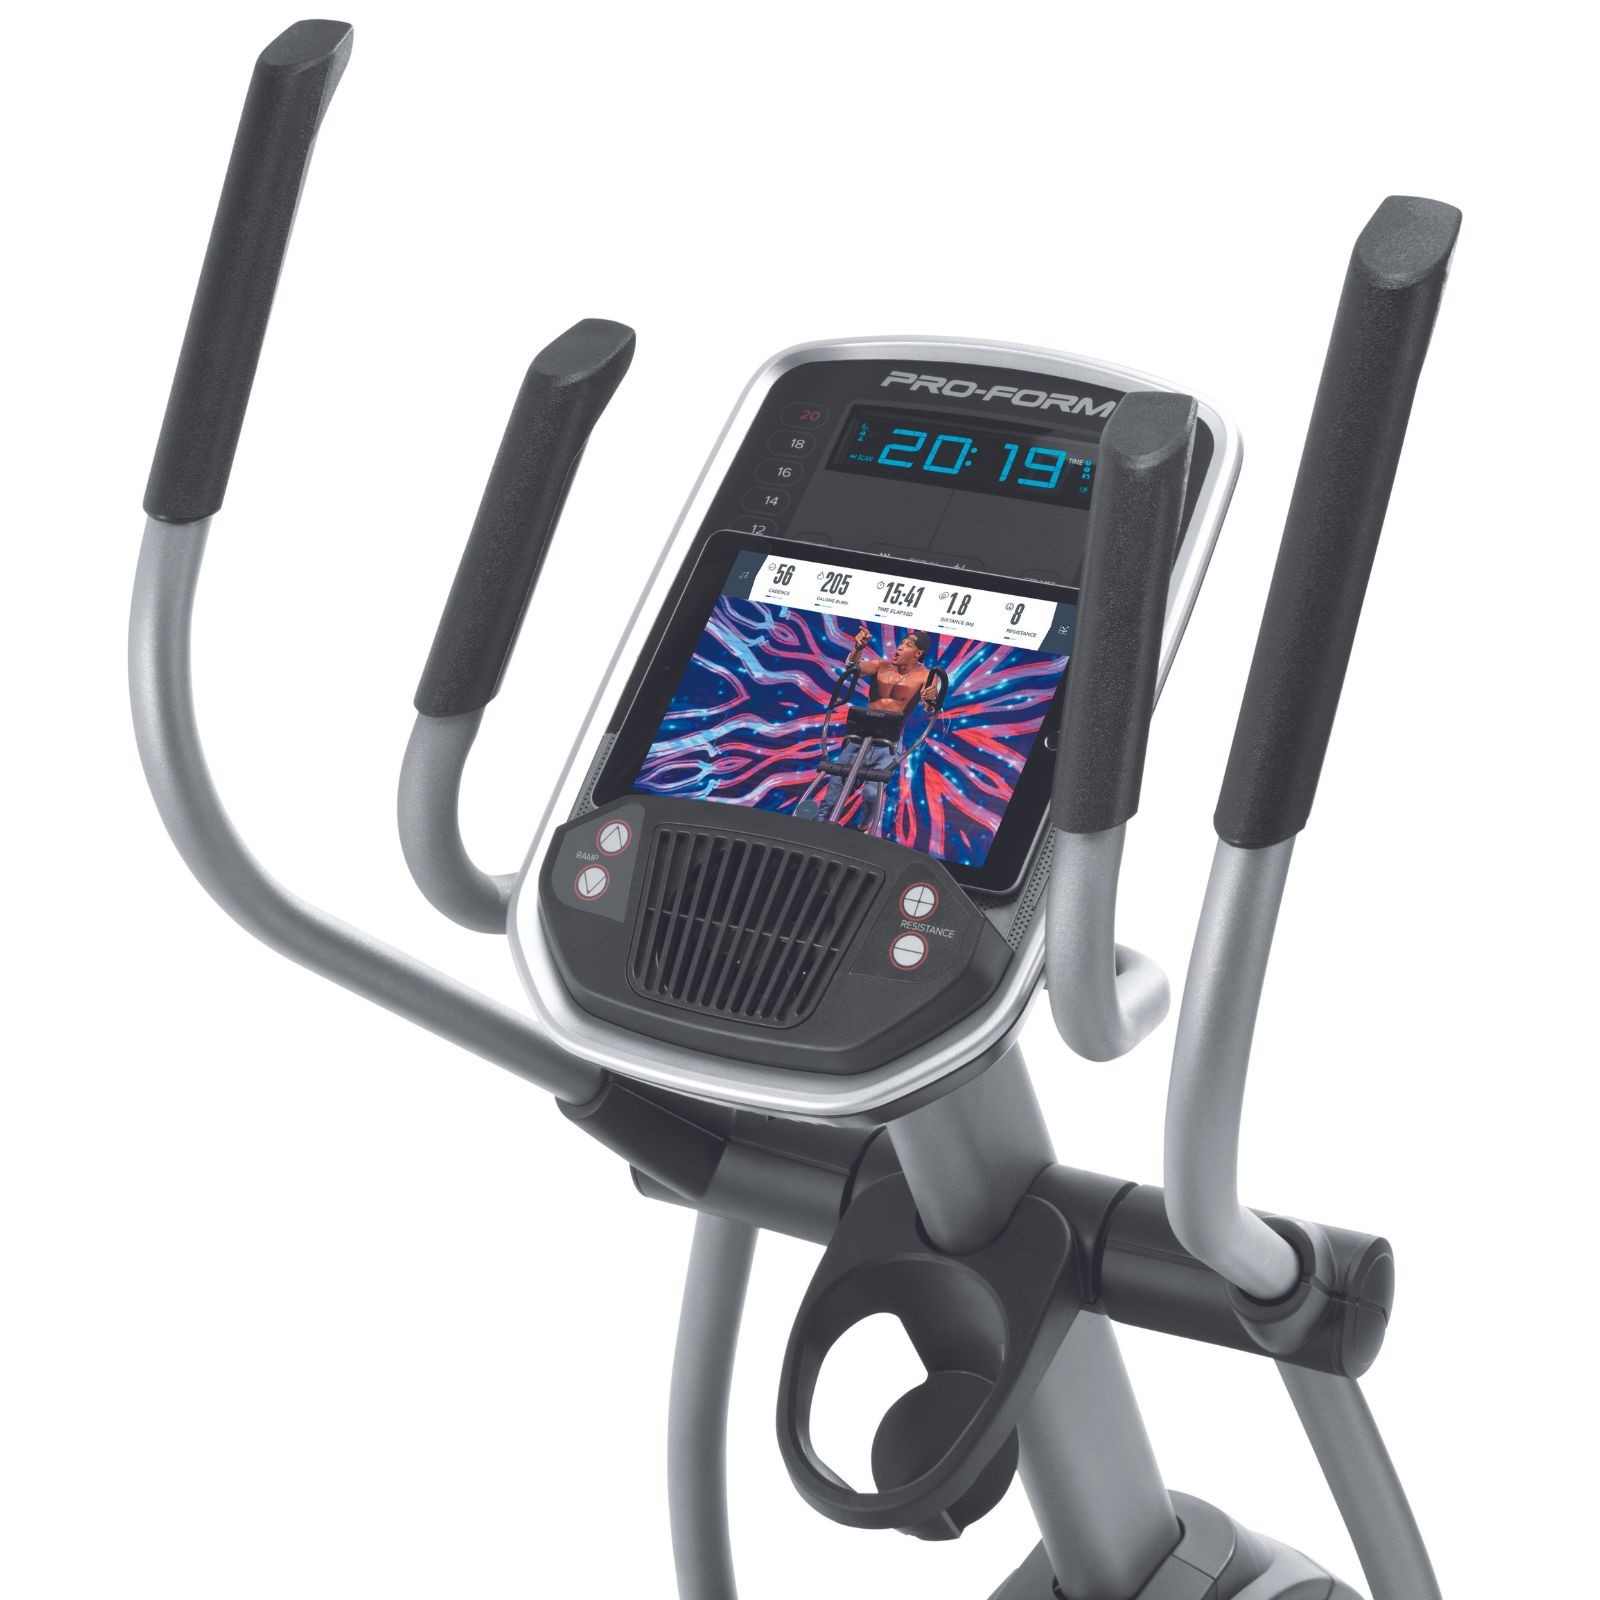 Access over 180 hand-picked trainers, 2,000 expert coaching videos, and 1000+ workouts via iFit® with the ProForm 720E Endurance Elliptical Cross Trainer.